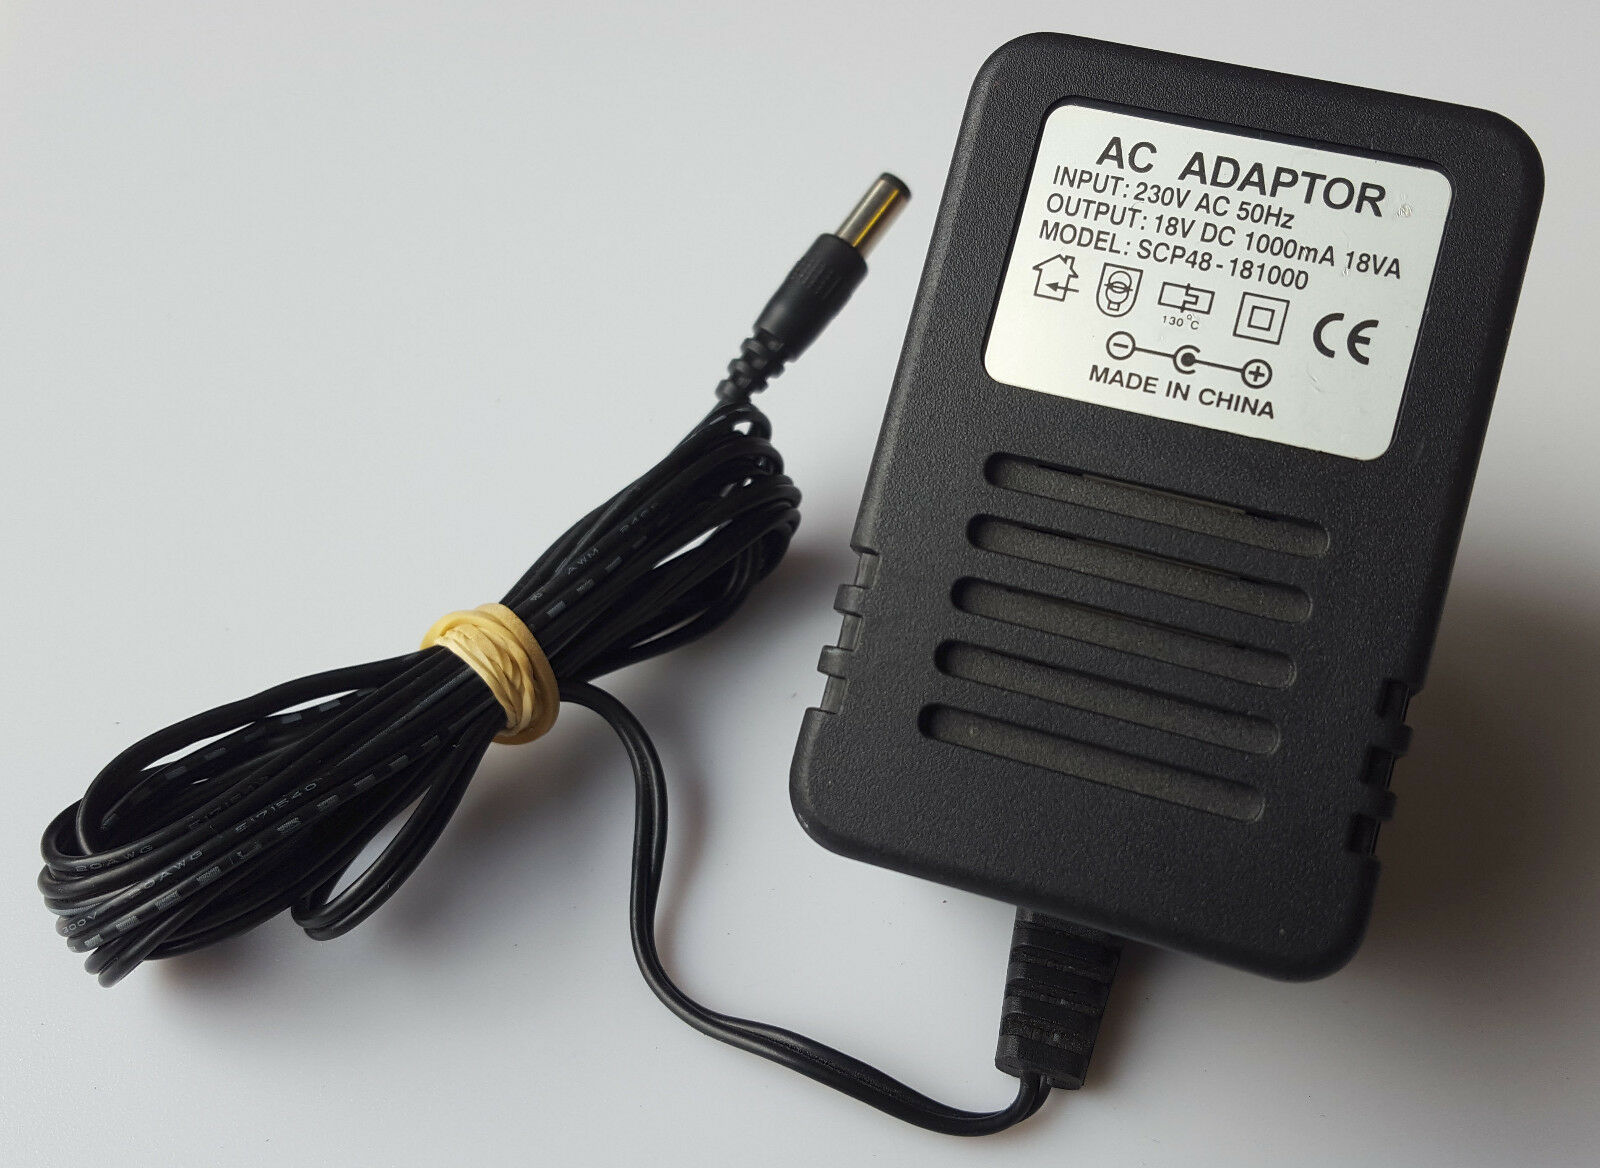 New SCP48-181000 AC/DC POWER SUPPLY ADAPTER 18V 1.0A - Click Image to Close